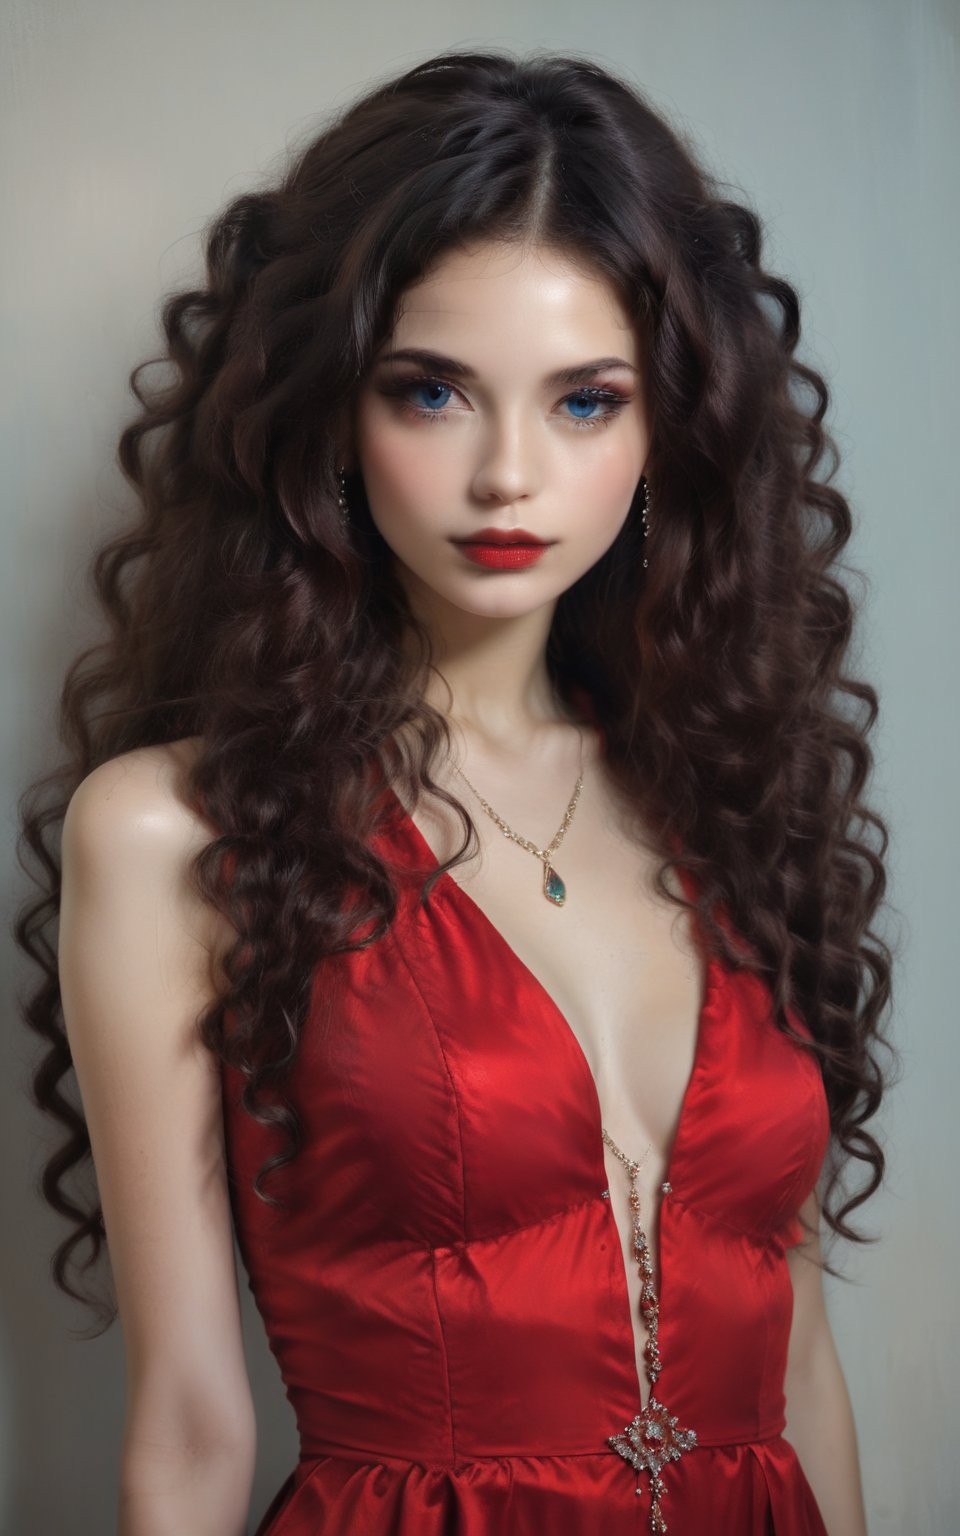 ((Generate hyper realistic half body portrait of captivating scene with a beautiful girl fantasy lady,)) detailed face, piercing, blue eyes, dark long hair, medium chest, dark red dress with intrincate details, photography style, Extremely Realistic, ,photo r3al high detail, 8k, hyper detailed, masterpiece